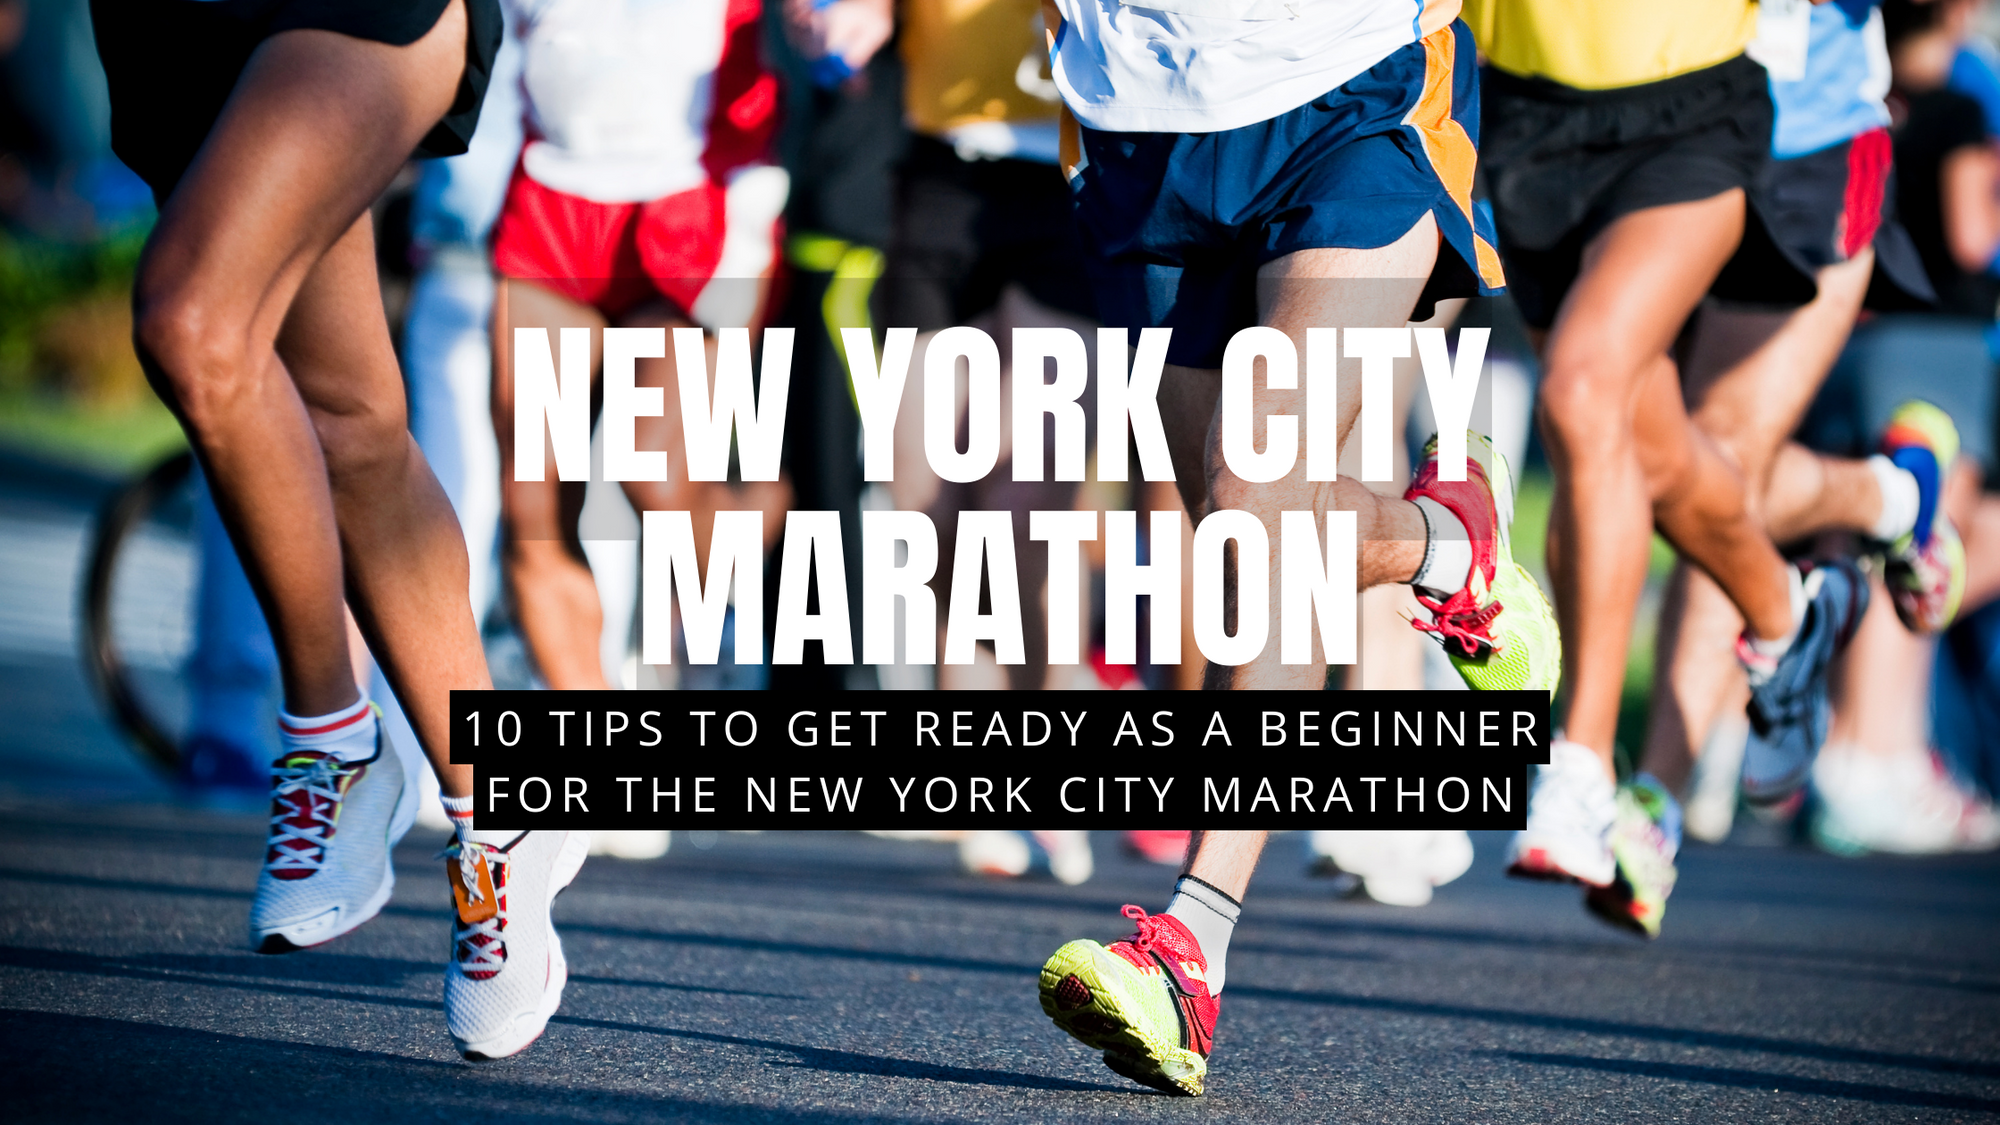 10 Tips to get ready as a beginner for the New York City Marathon